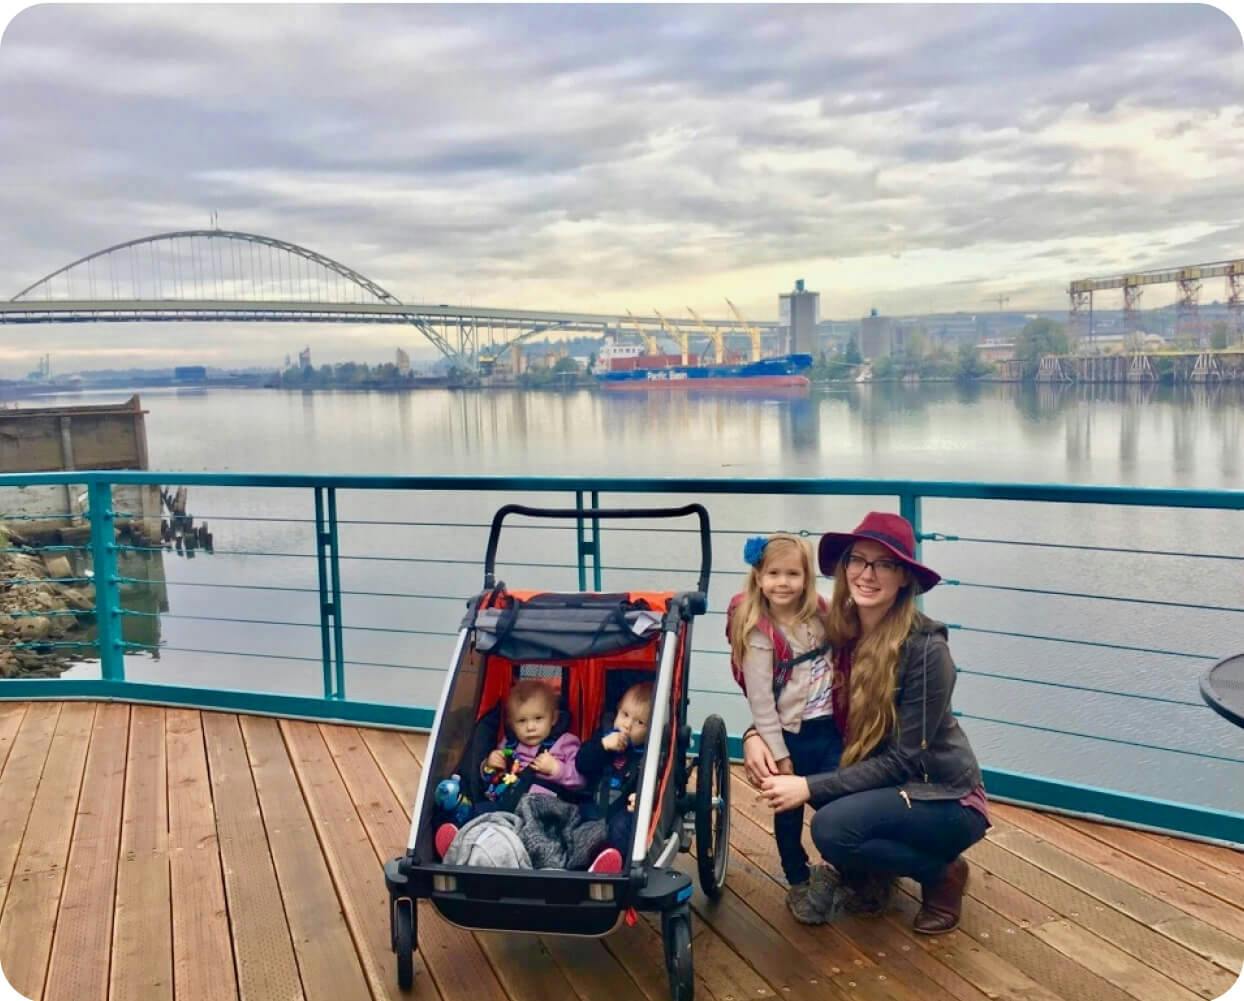 A photo of a mom with three kids, taken in front of an urban riverfront.